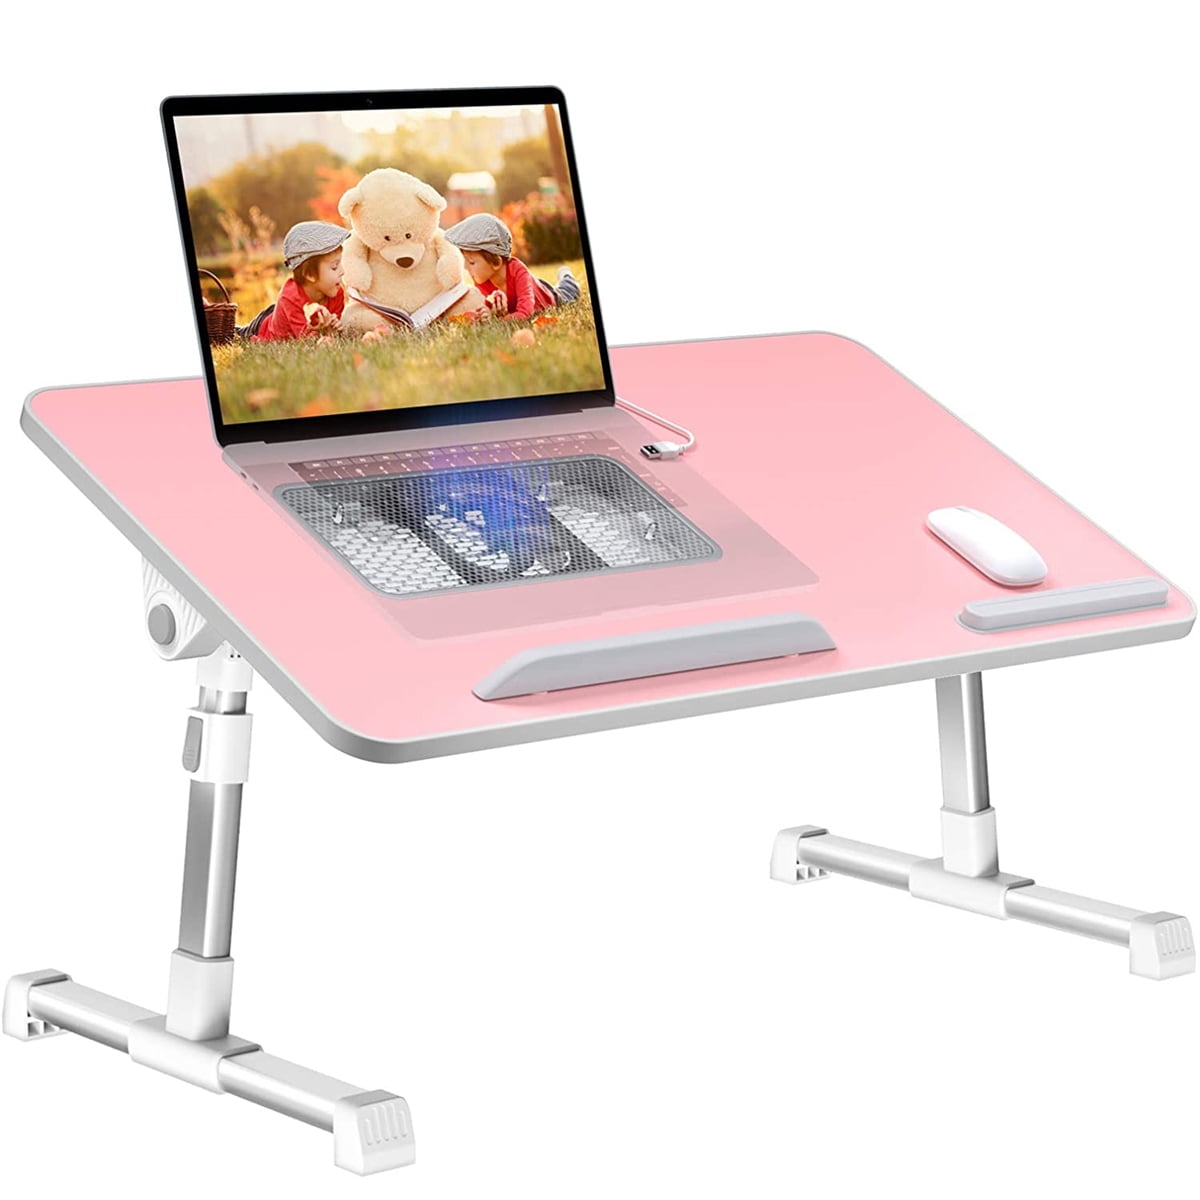 ZYUTTGY Aluminum Alloy Laptop Table Adjustable Portable Folding Computer Desk Students Dormitory Laptop Table Stand Tray for Sofa Bed